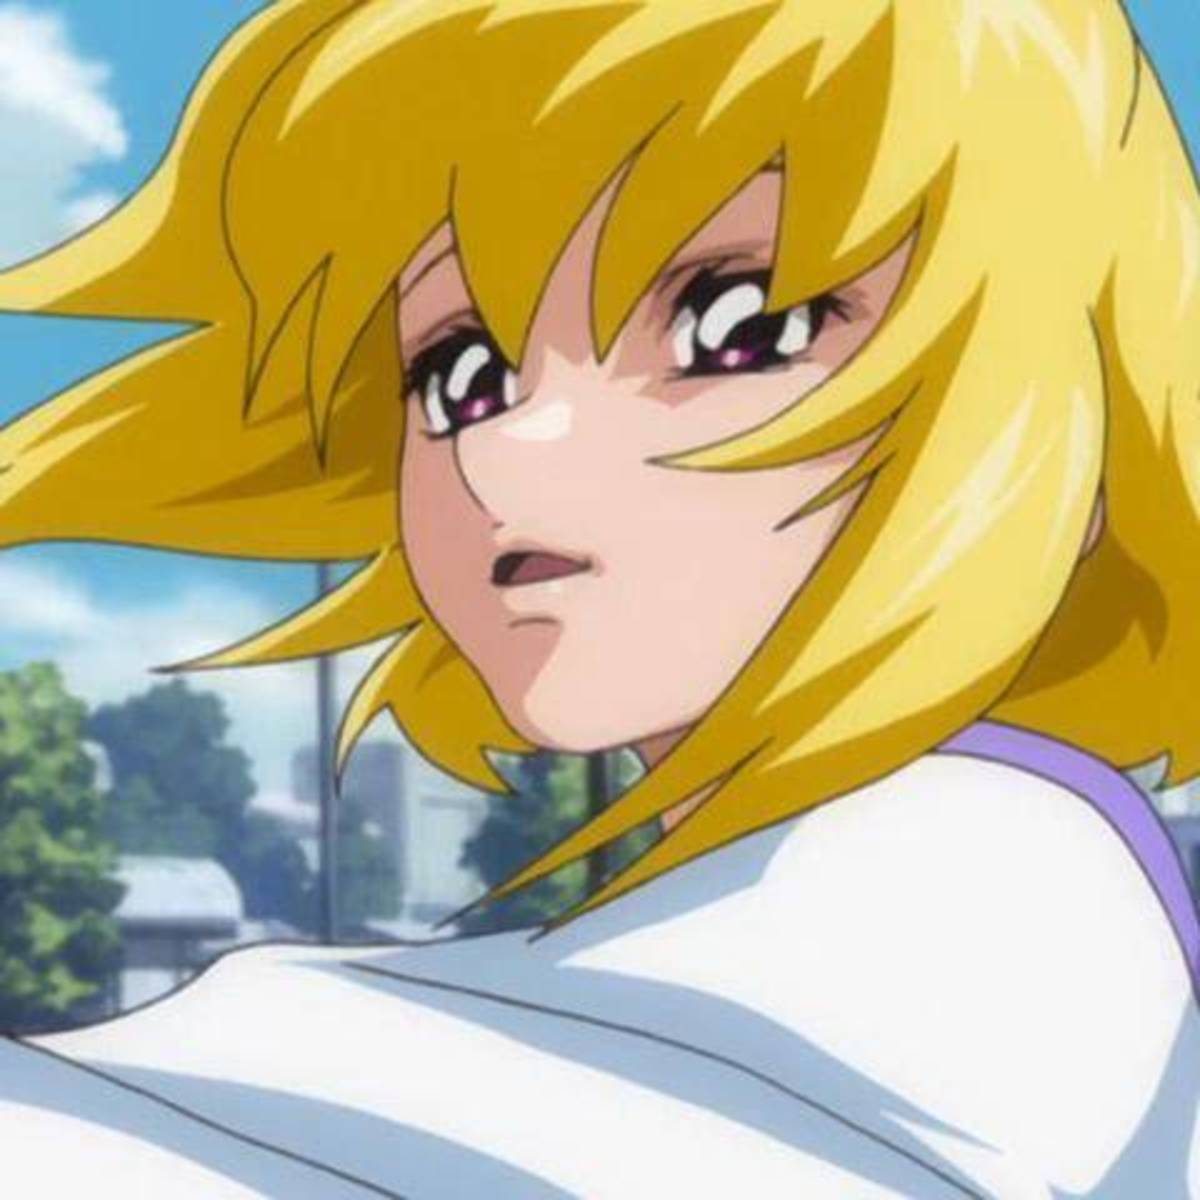 Why Stella Loussier is an Interesting SEED Destiny Character (In My Opinion)